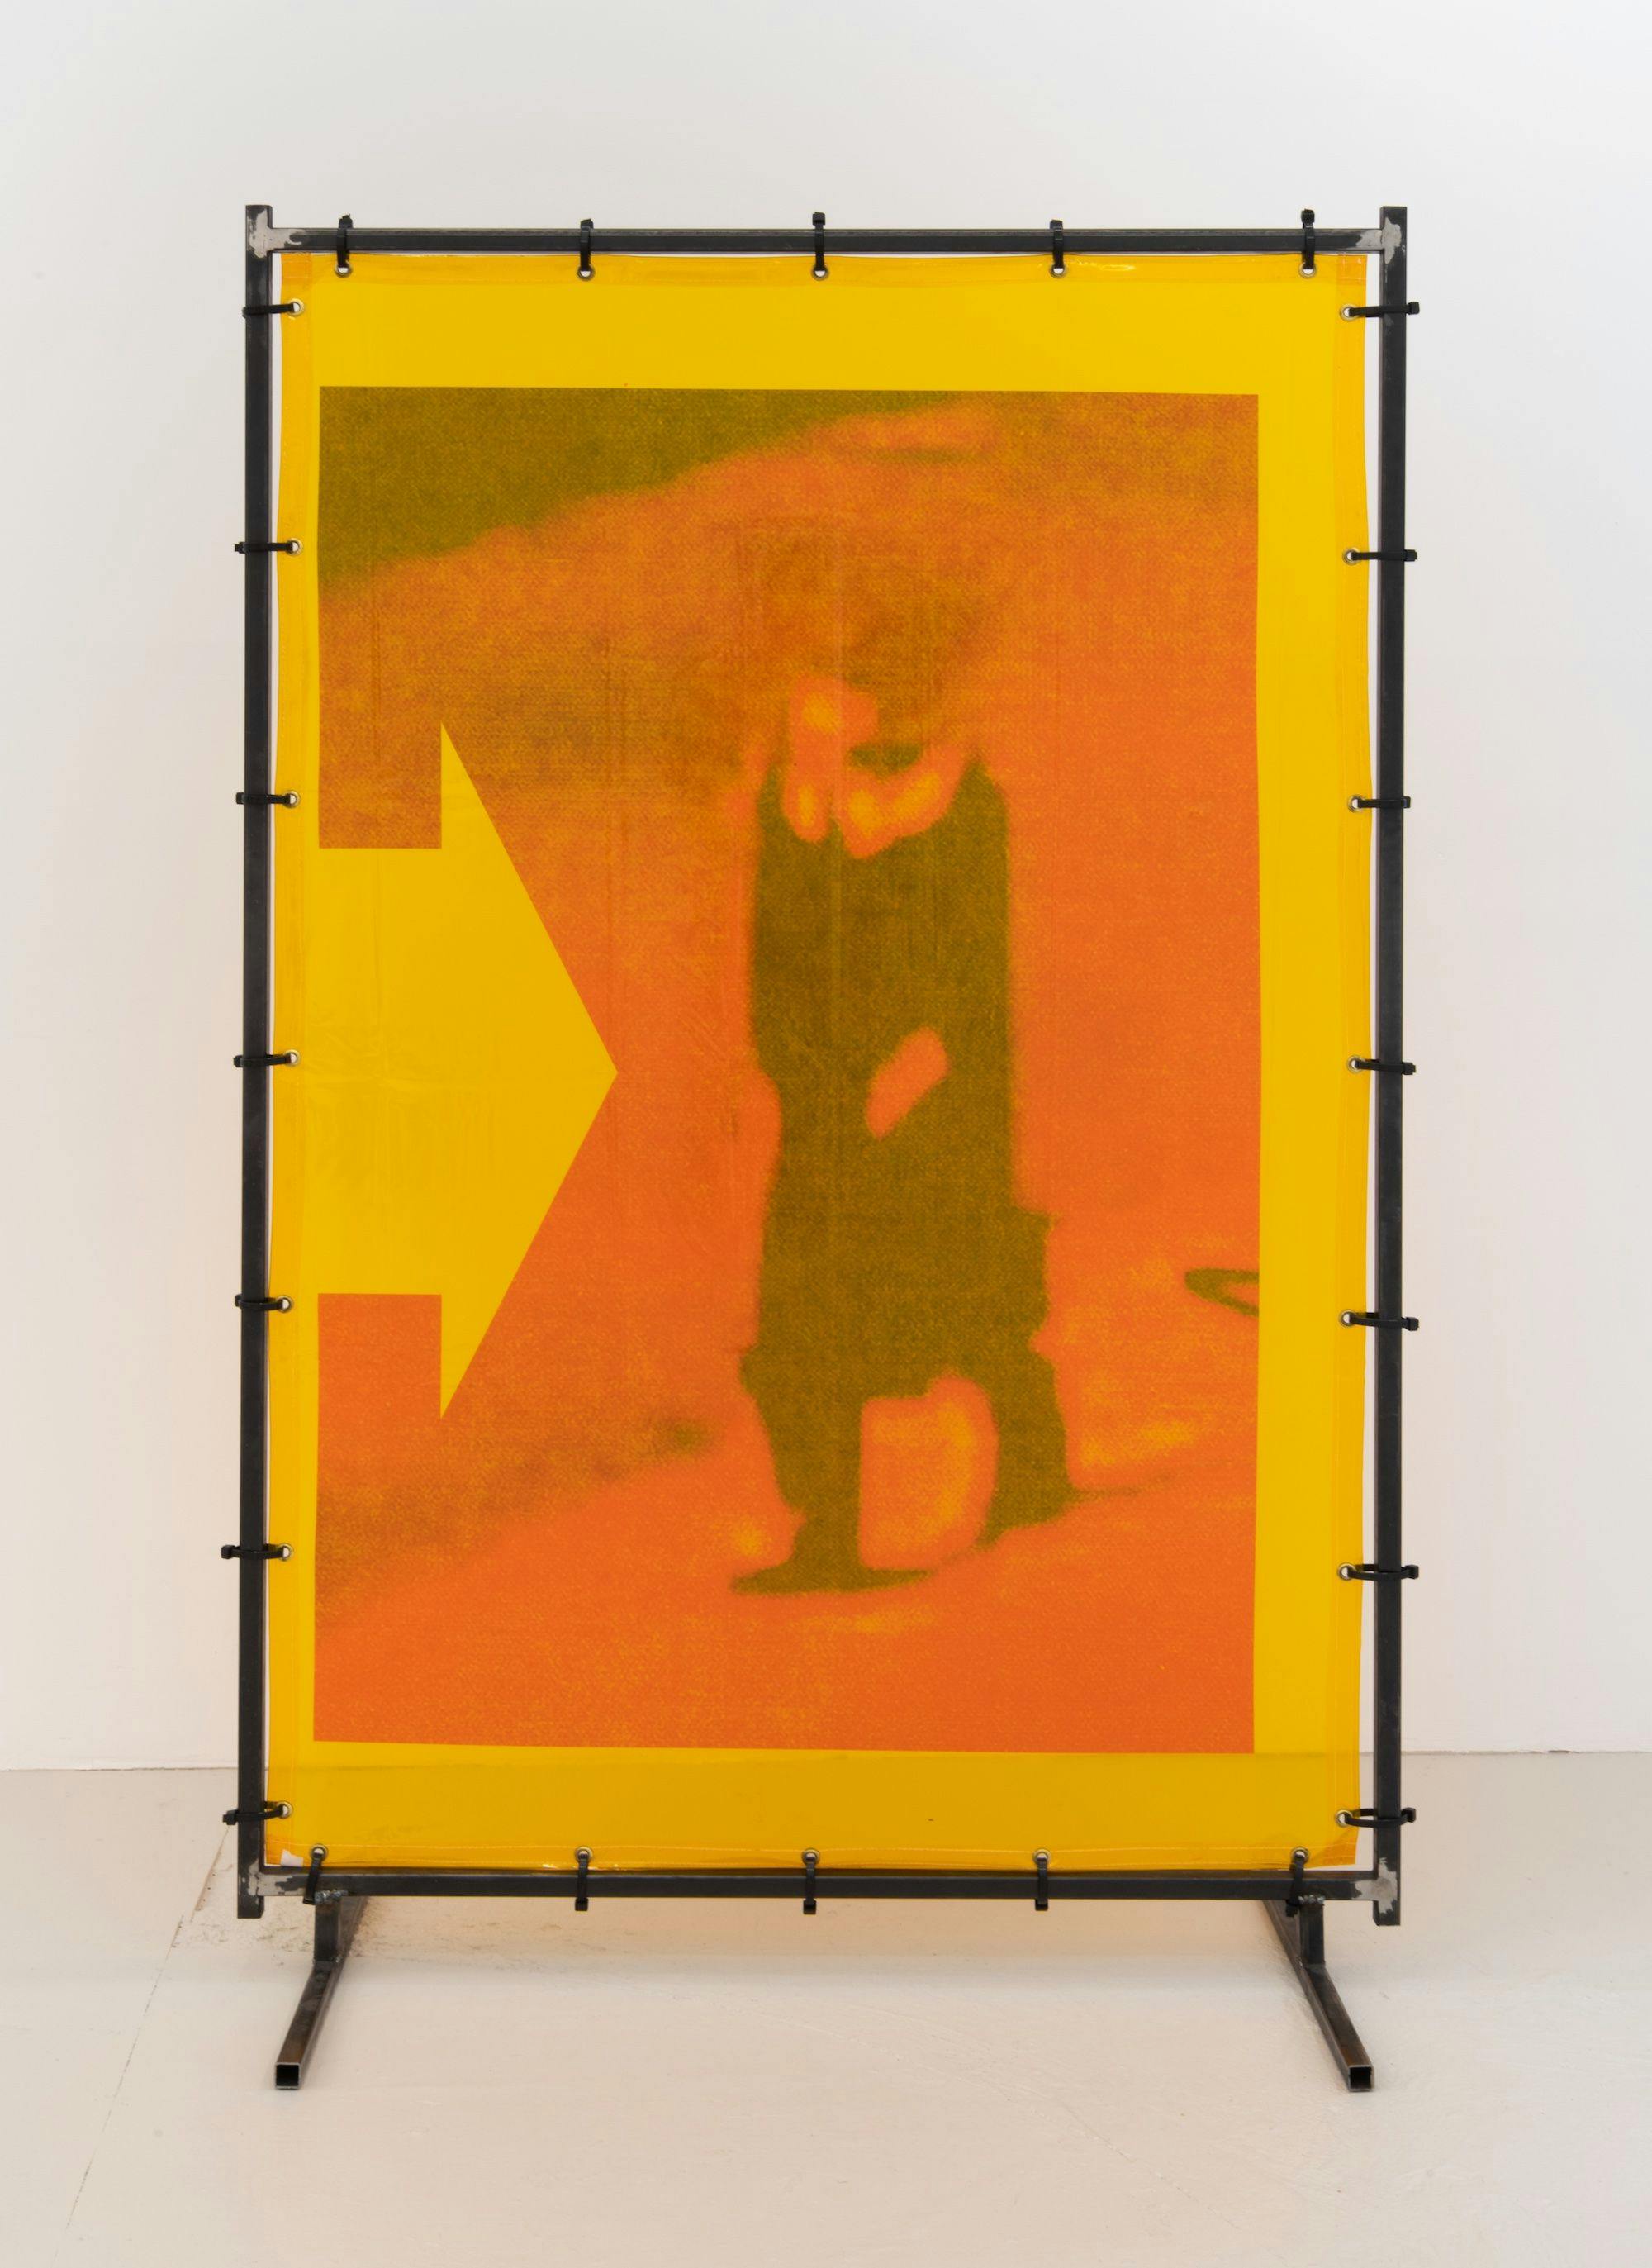 A yellow and orange painting of a human figure in motion on a black stand.